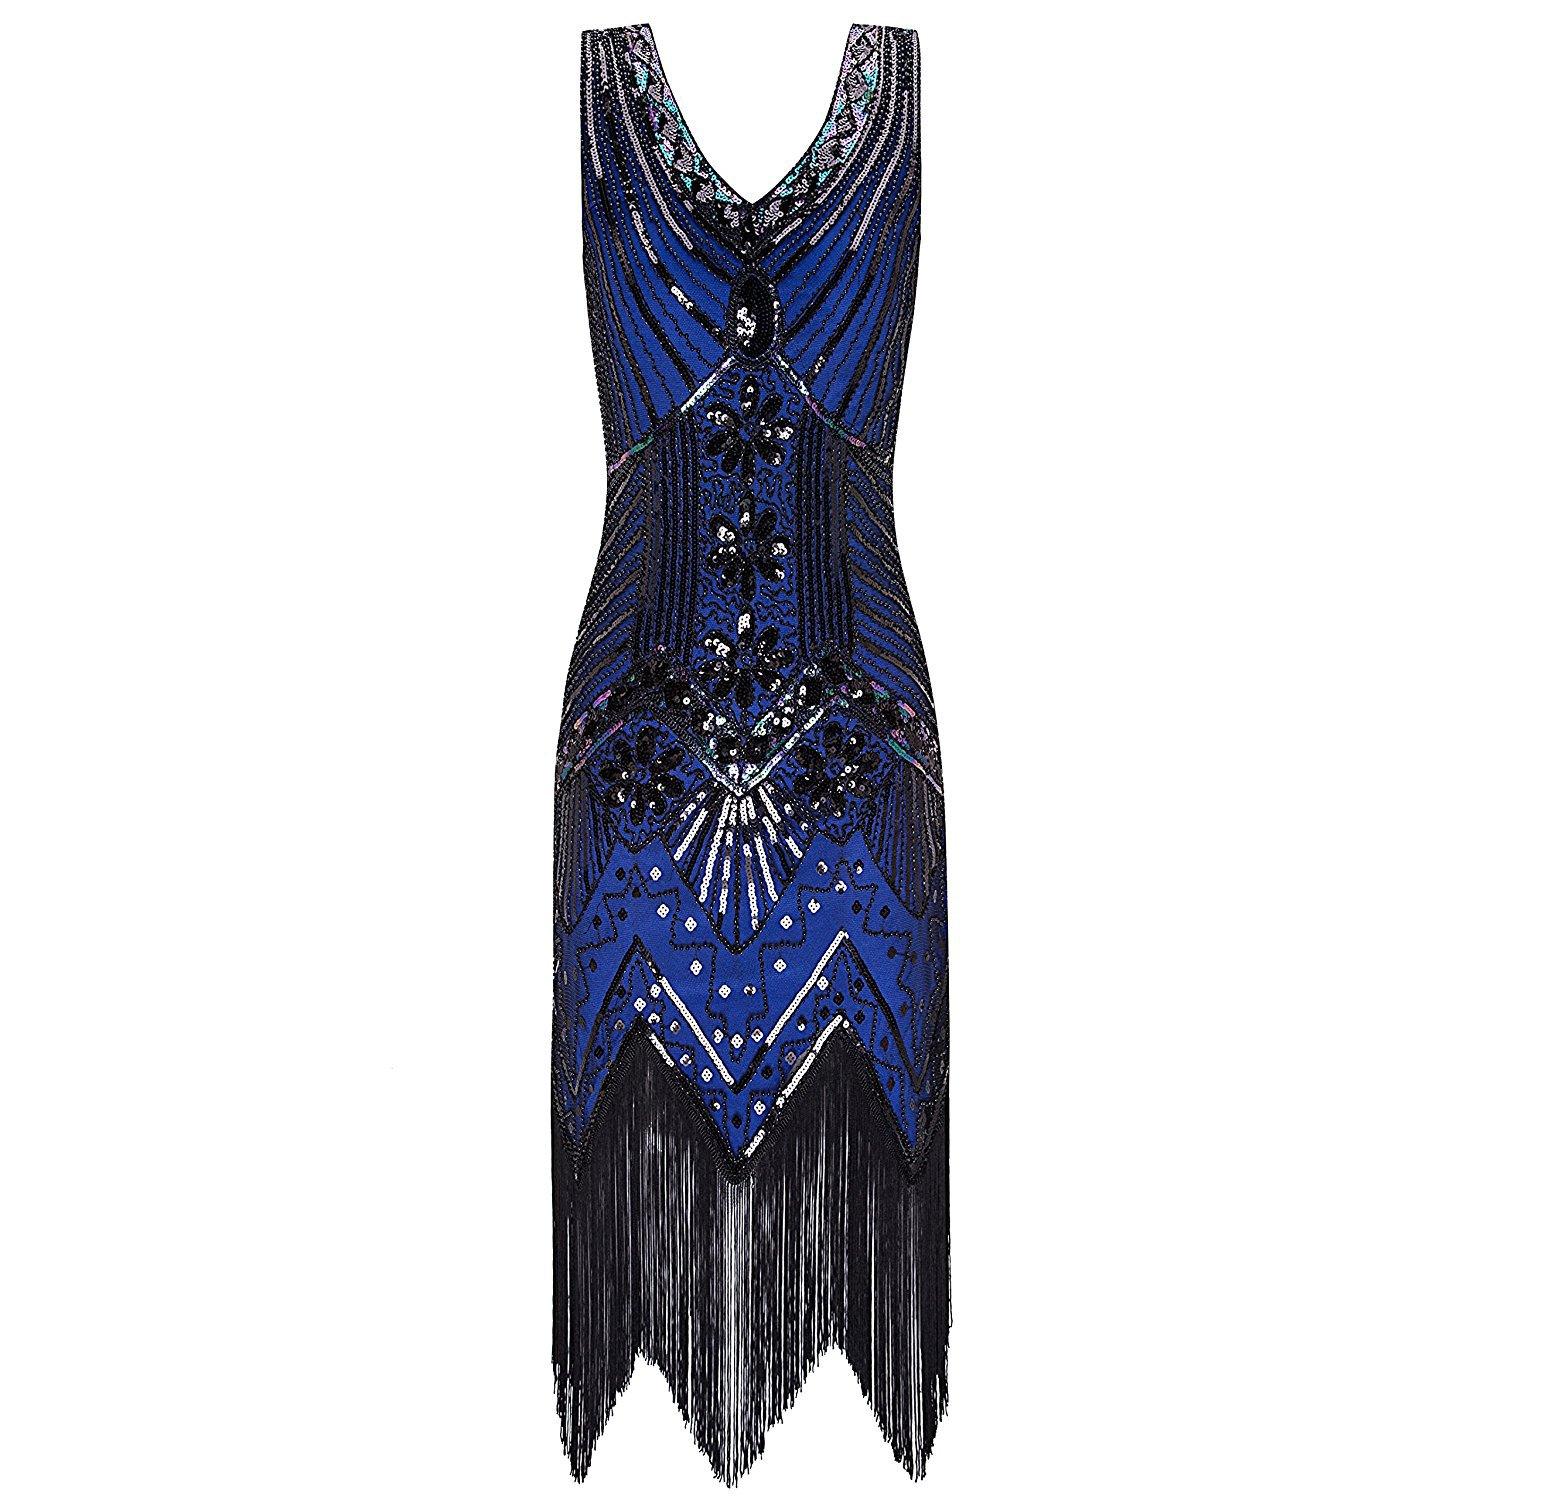 Navy Blue 1920s Dress Gatsby Flapper-style Party